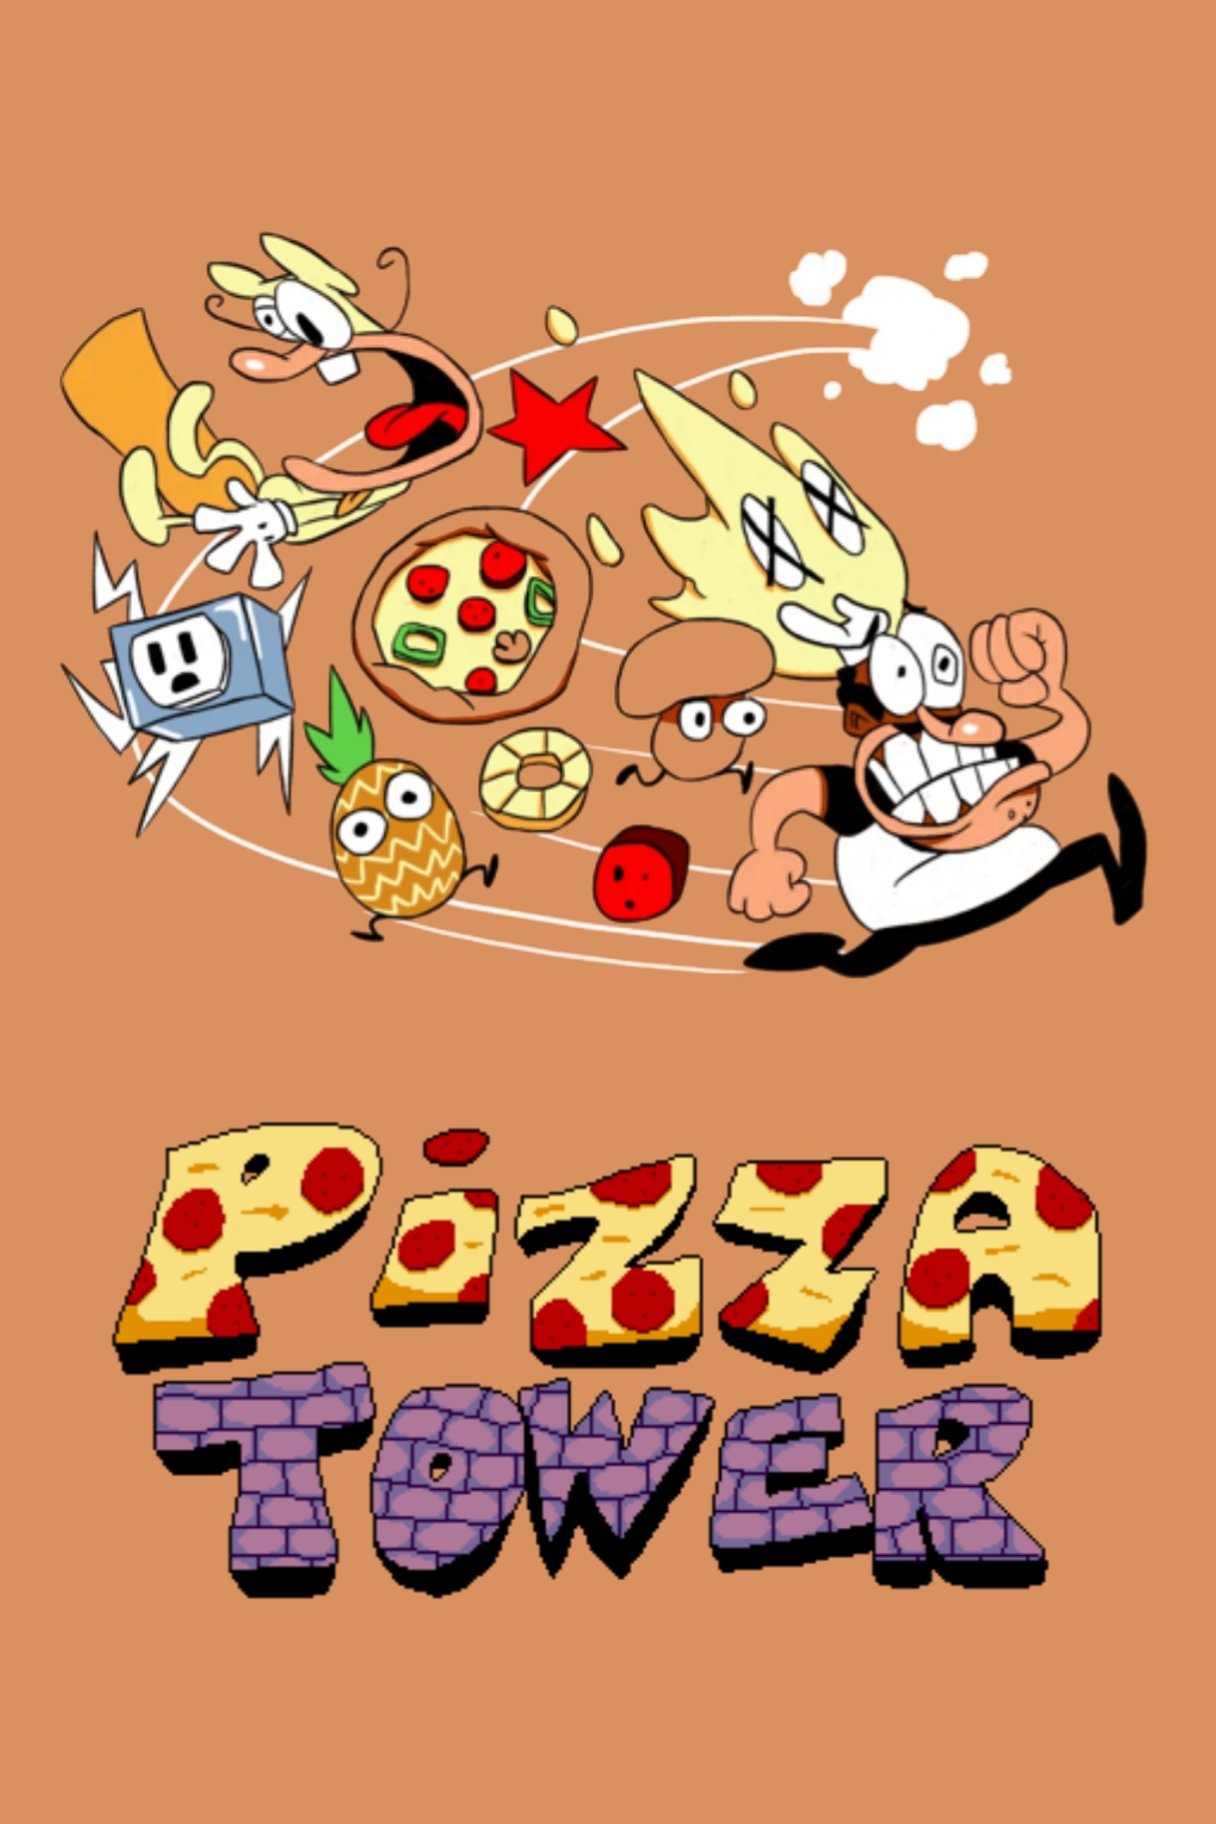 Pizza Tower ULTRA! [Pizza Tower] [Concepts]